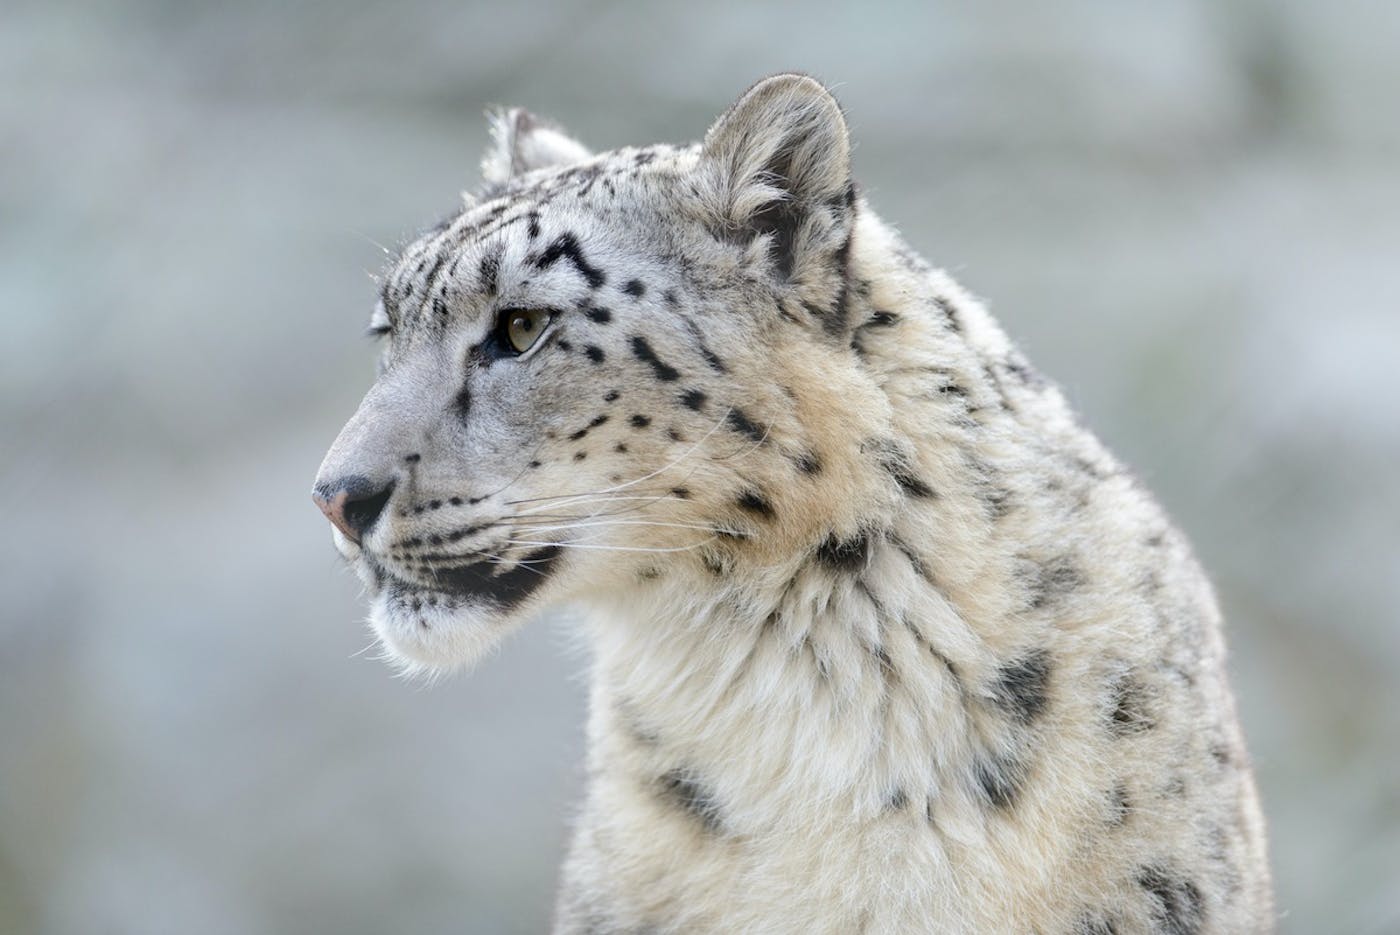 Rebalancing the Snow Leopard Ecosystem in Eastern Eurasia